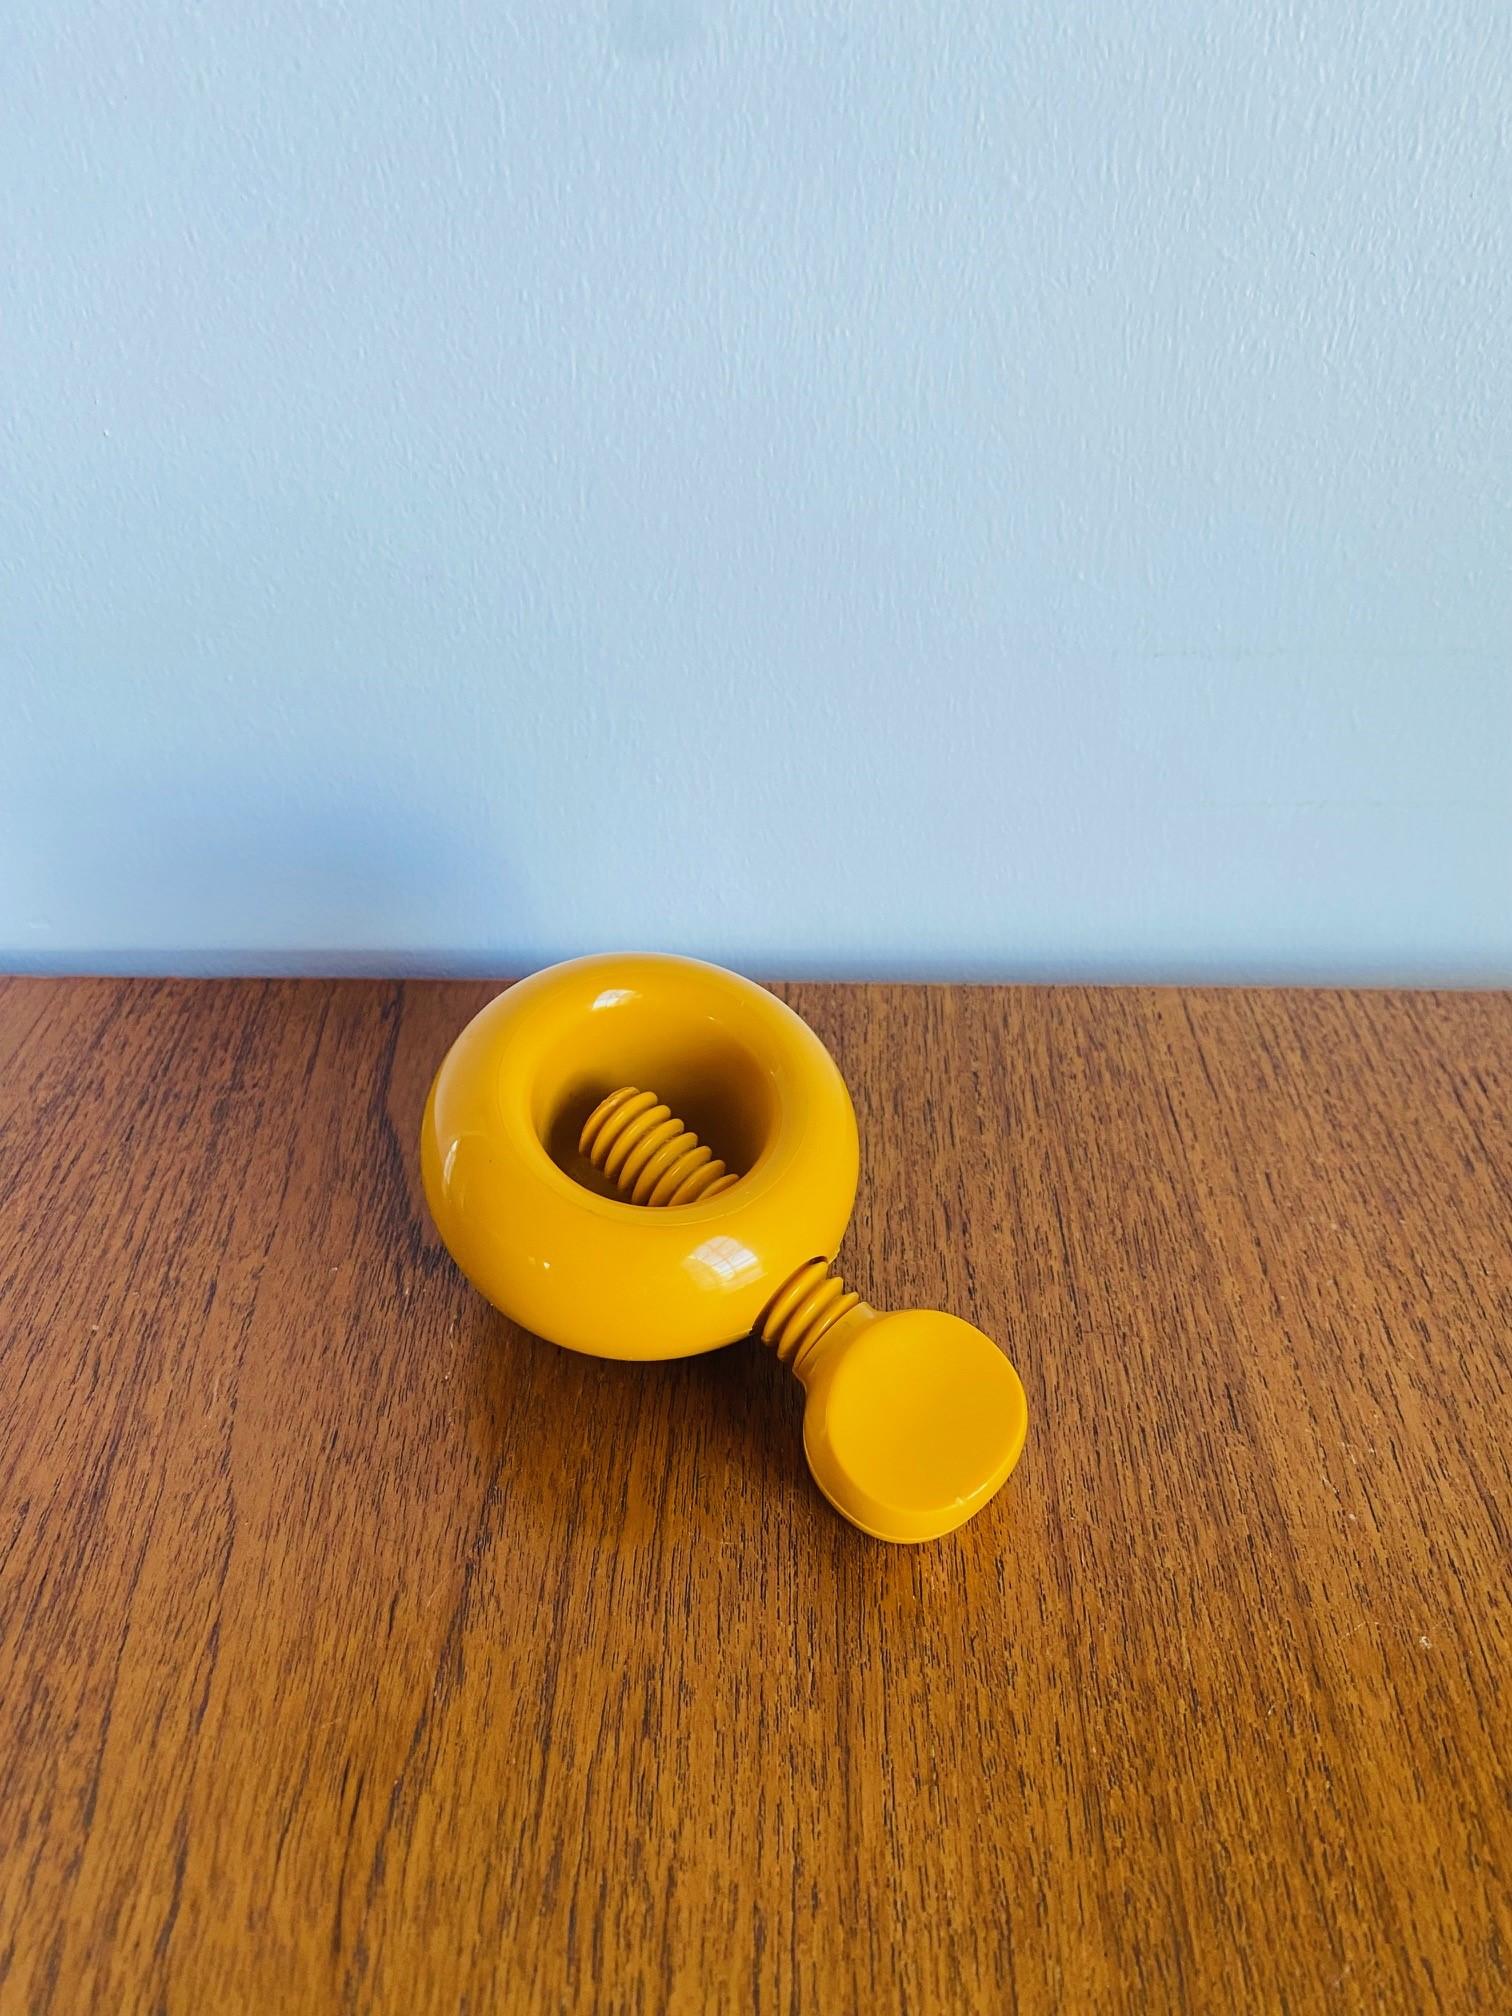 Incredibly cool and functional Danish modern screw nut cracker by Dana Plast.  This piece is cool and brings a cool, minimal retro feel with its aesthetic. Utilitarian and chic.

Mid-Century, Hollywood Regency, Art Deco, Eclectic, Coastal, Modern,